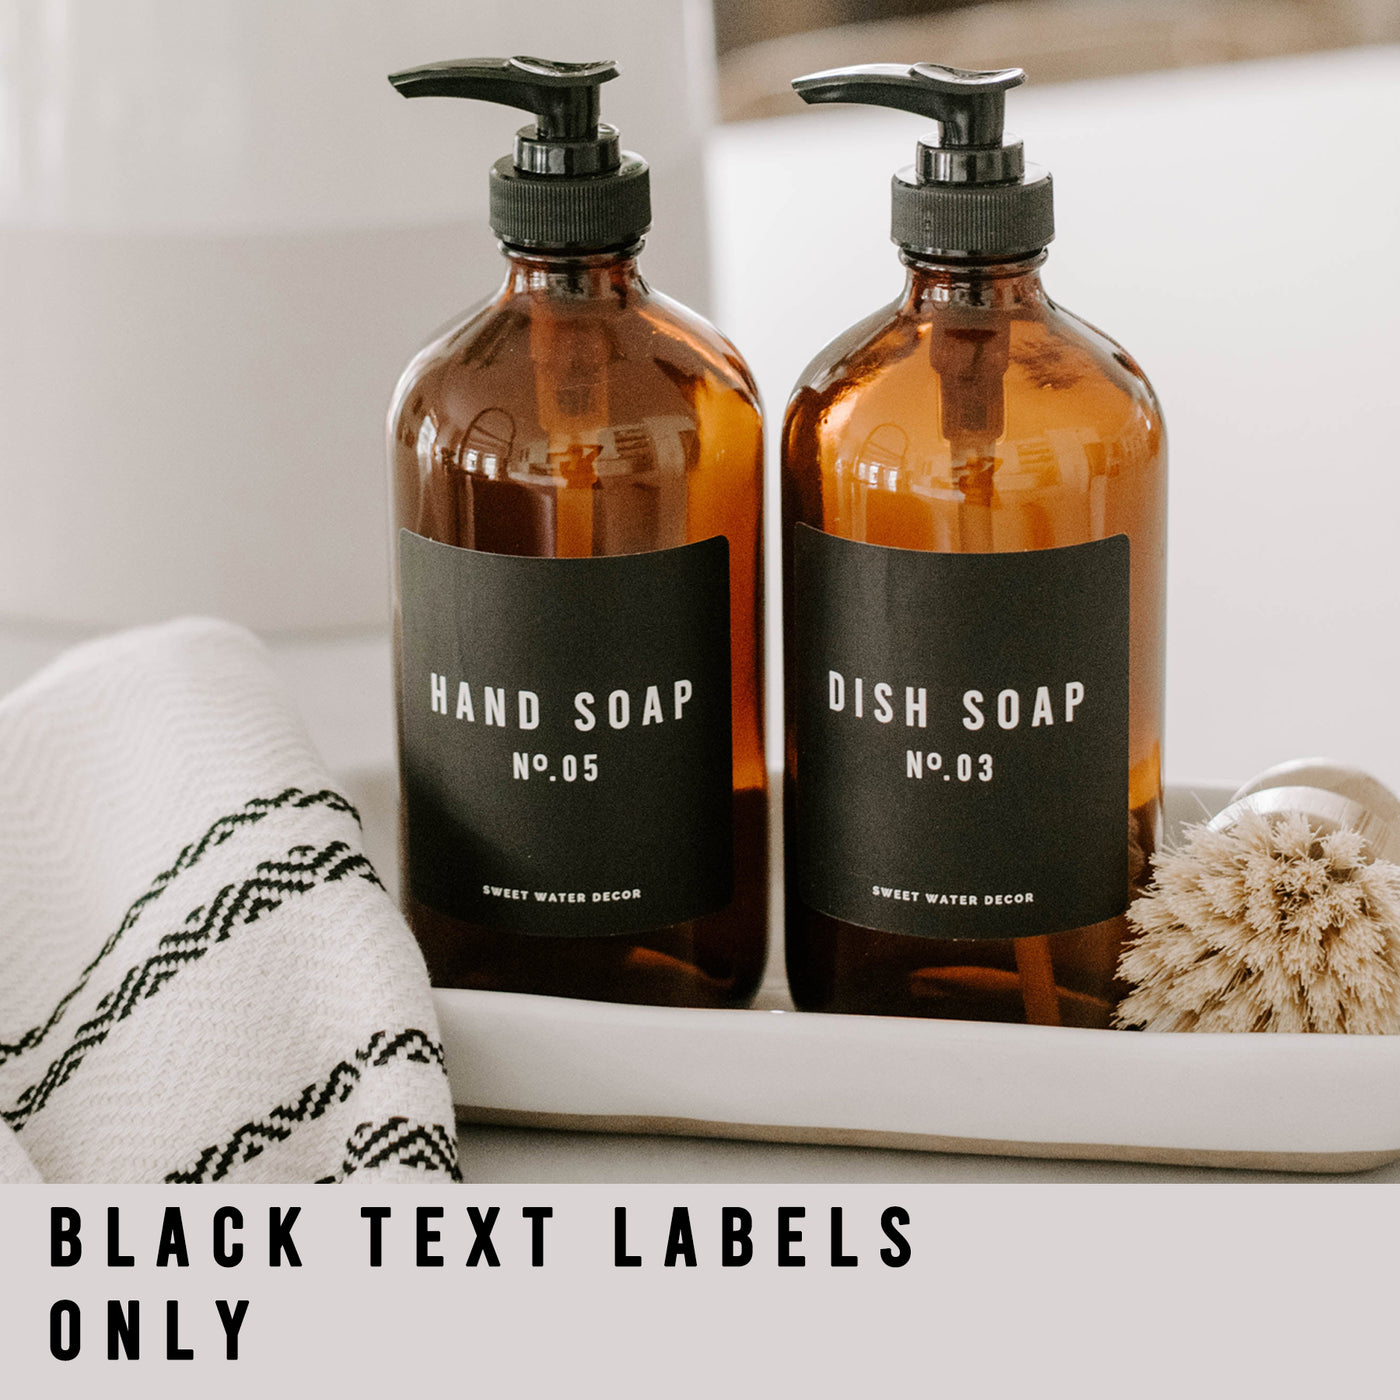 Black Text Labels for Plastic and Glass Dispensers - Sweet Water Decor - Dispensers